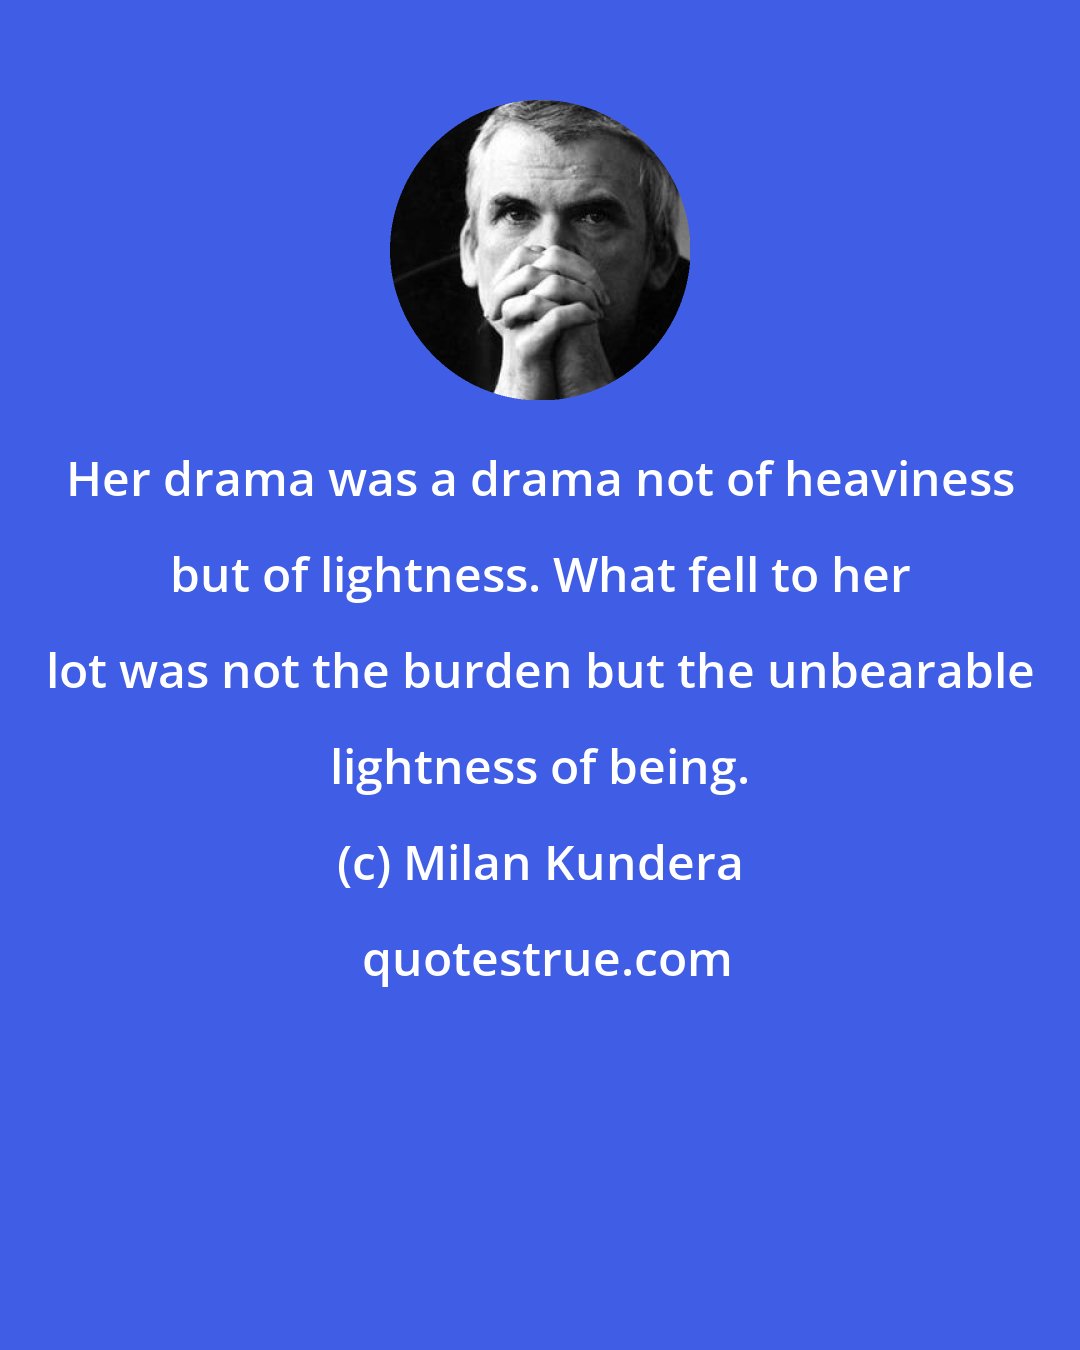 Milan Kundera: Her drama was a drama not of heaviness but of lightness. What fell to her lot was not the burden but the unbearable lightness of being.